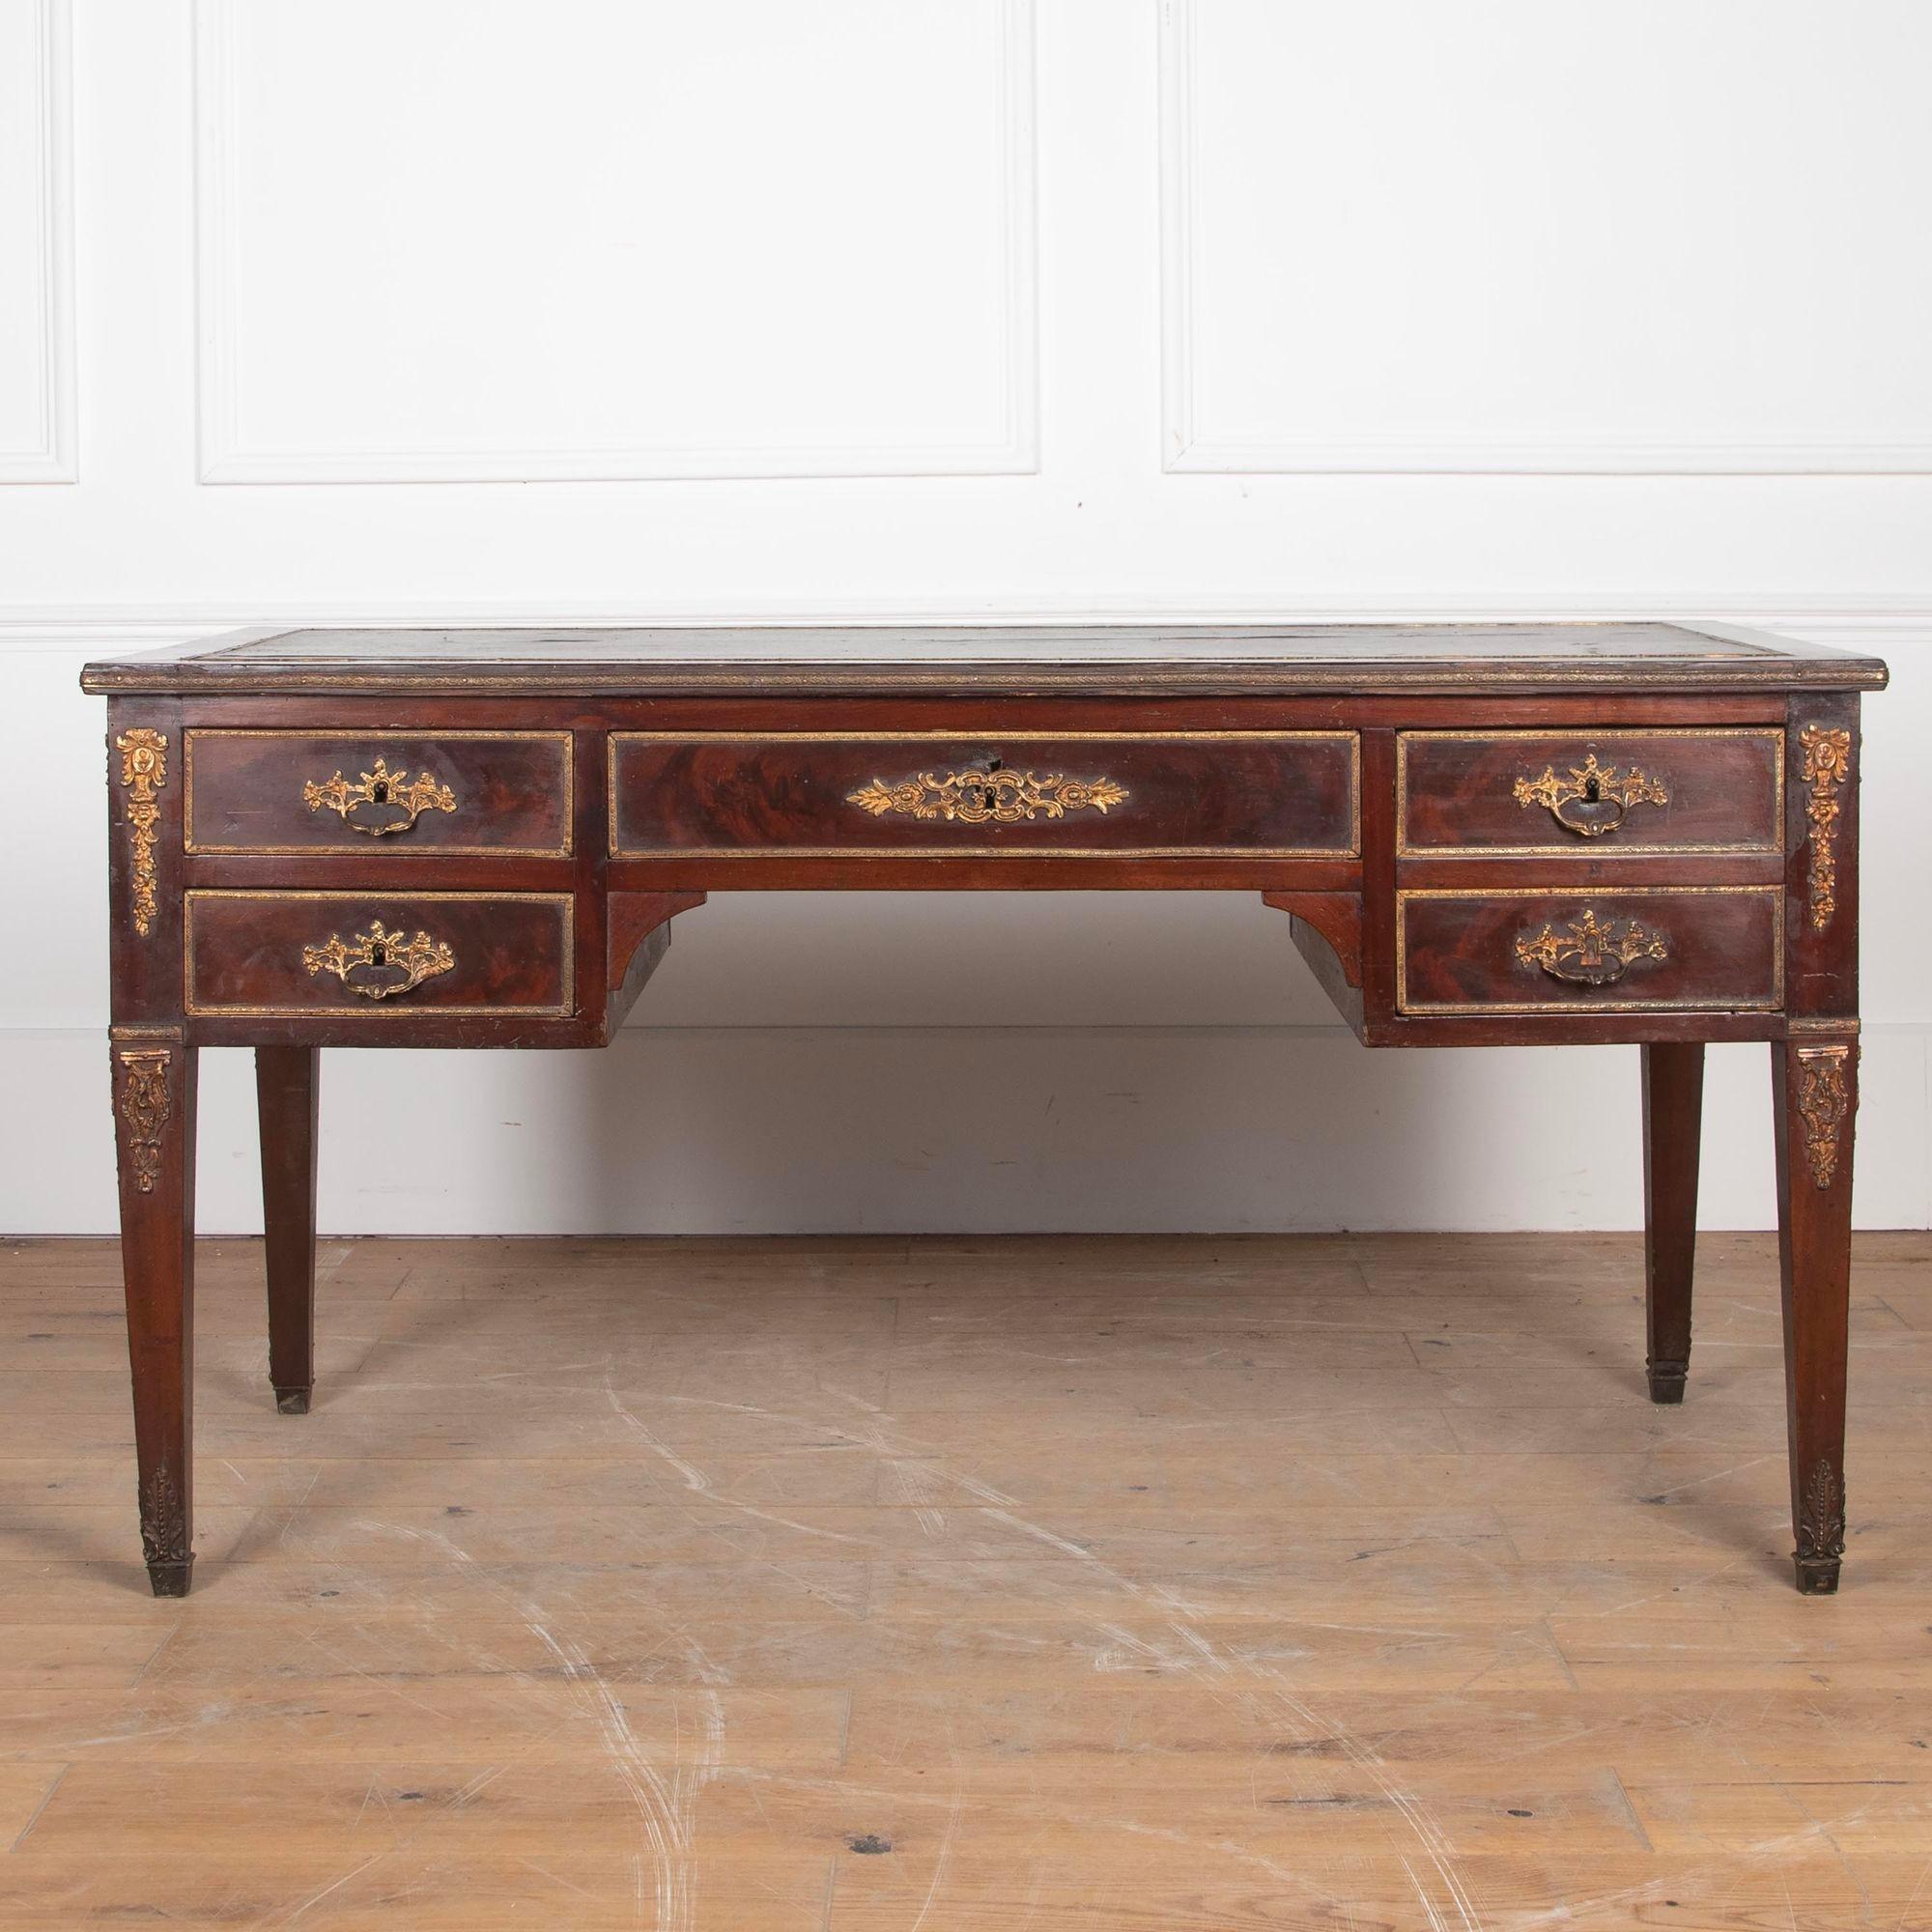 19th Century French writing table with worn leather top and ormolu mounts.
This writing table looks the same on both sides, but the fittings on the back are faux.
It also features two extending slides to either end and several opening